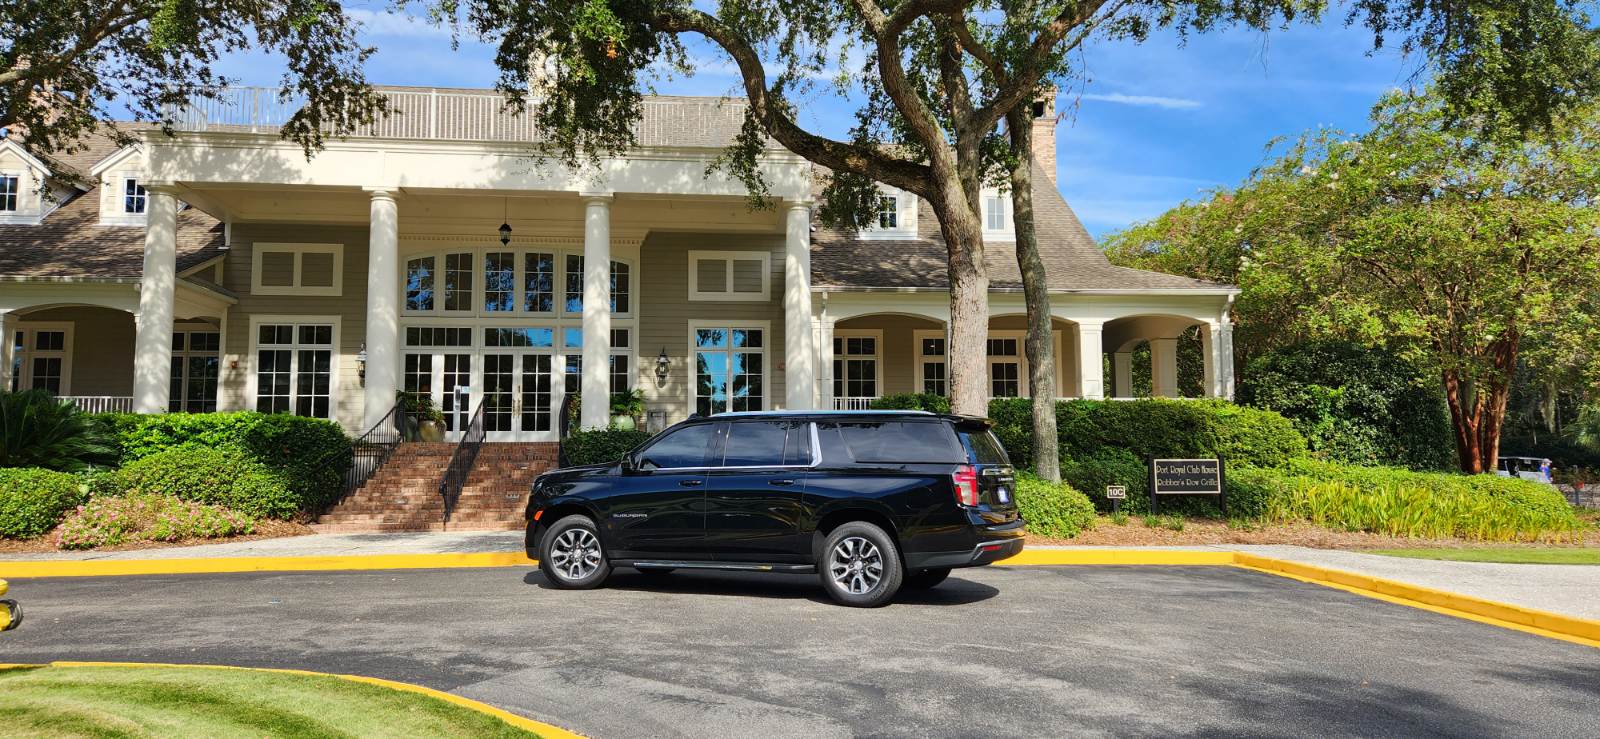 "Reliable Hilton Head Airport Transportation: Your Trusted Choice"
